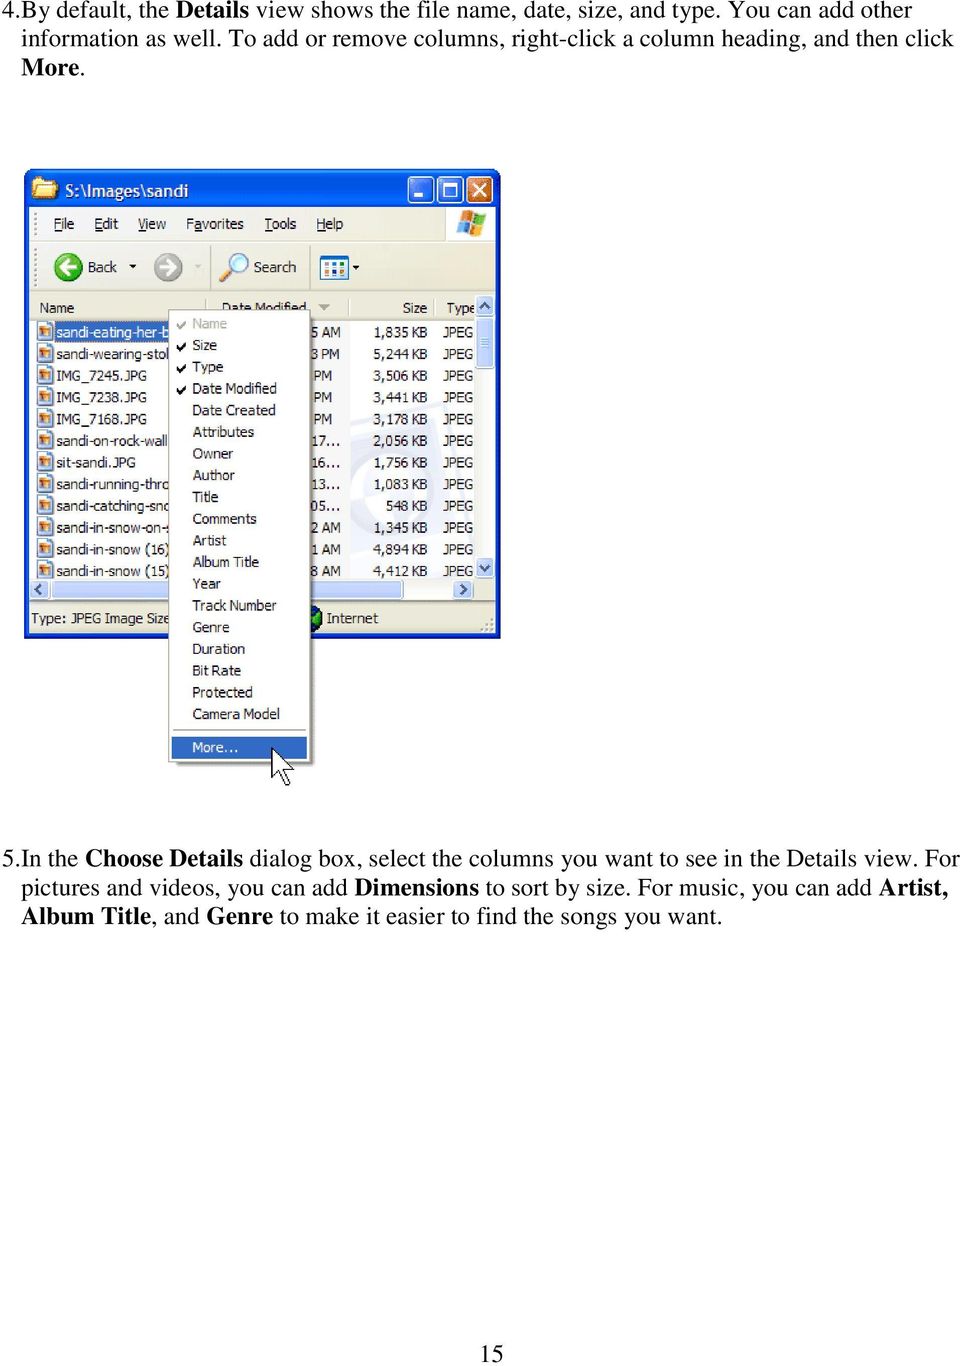 In the Choose Details dialog box, select the columns you want to see in the Details view.